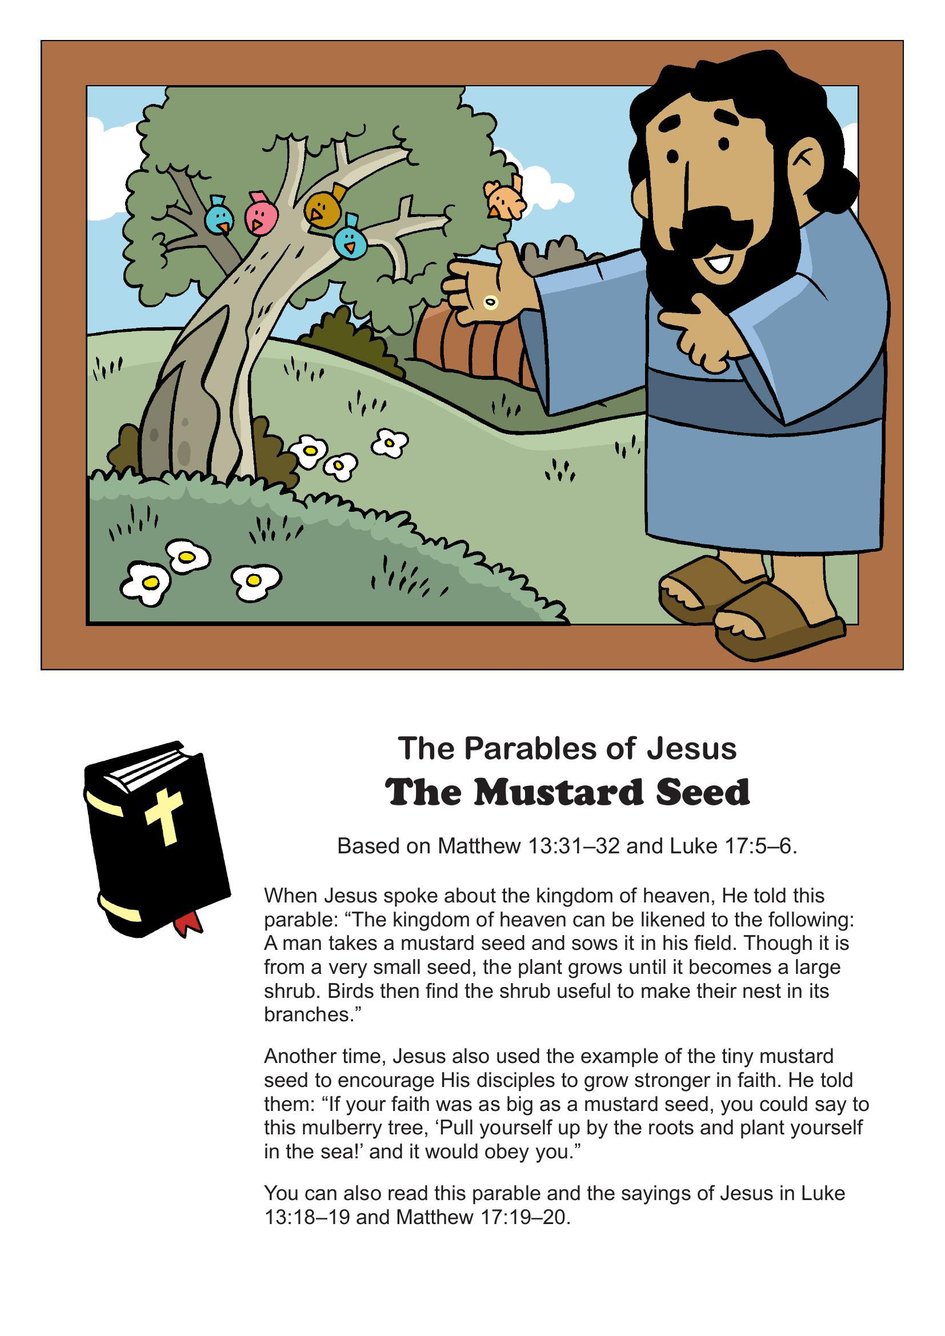 The Parables of Jesus: The Mustard Seed | My Wonder Studio